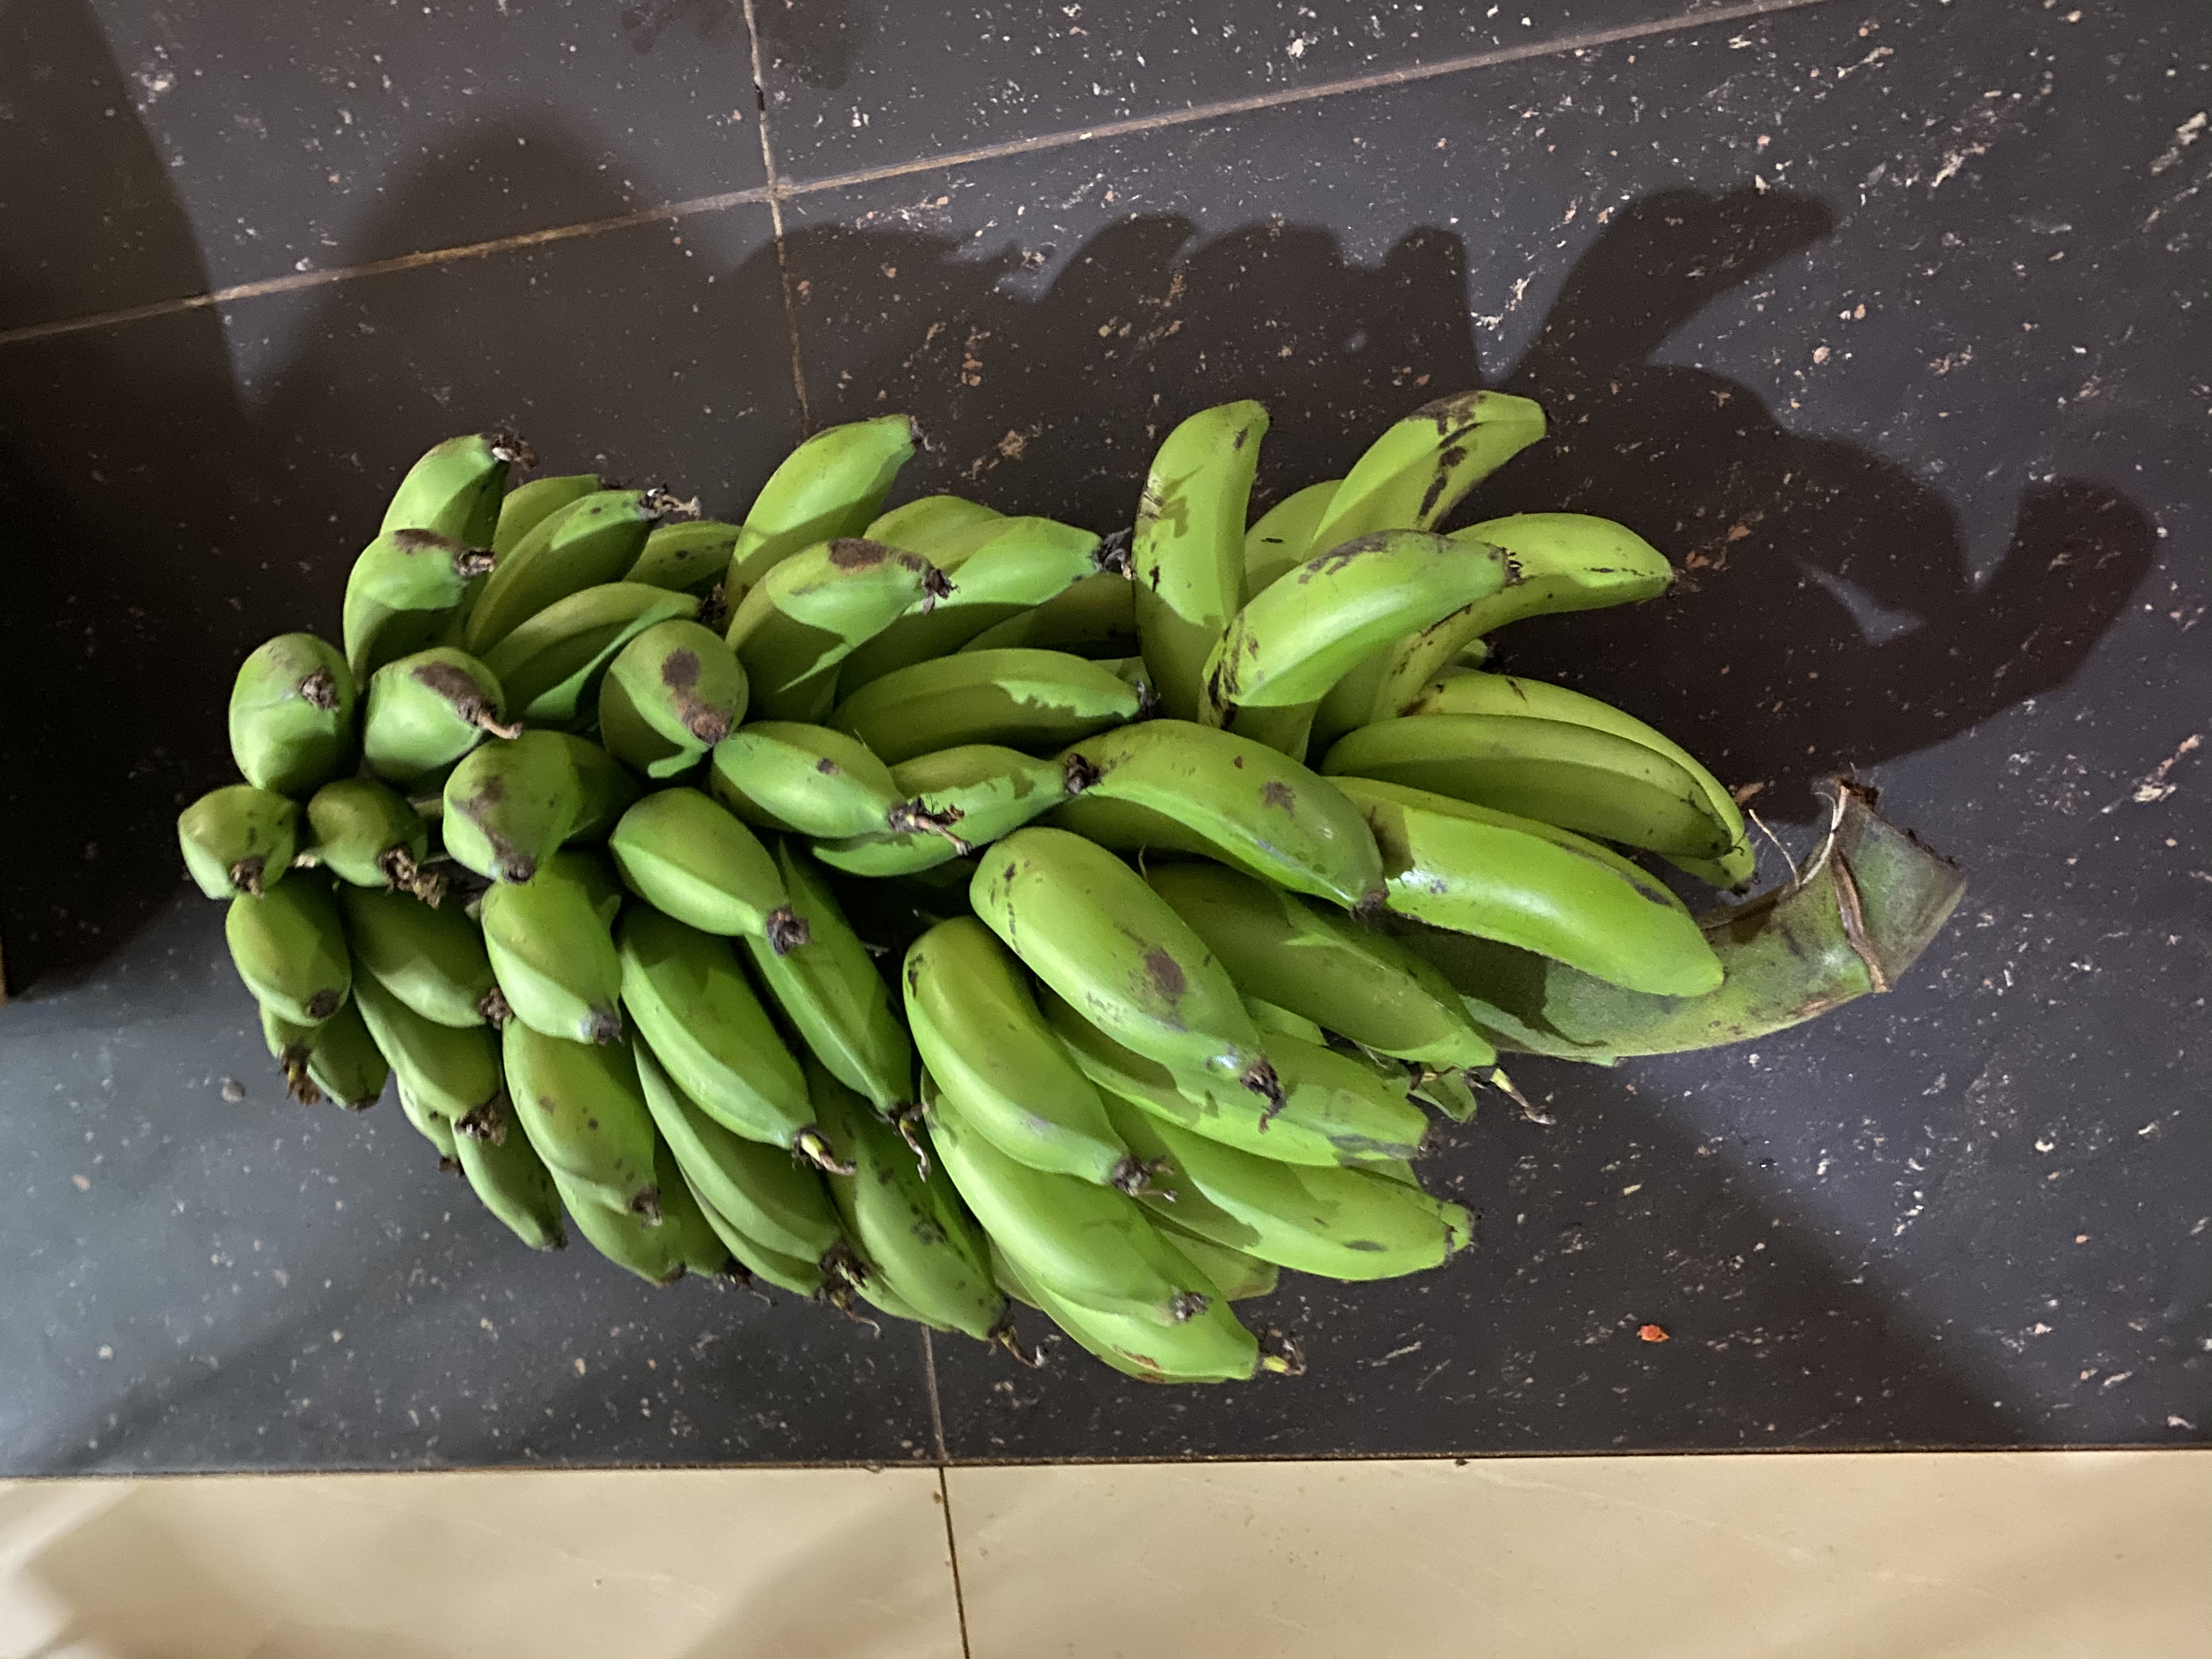 They gave us a lovely bunch of bananas!